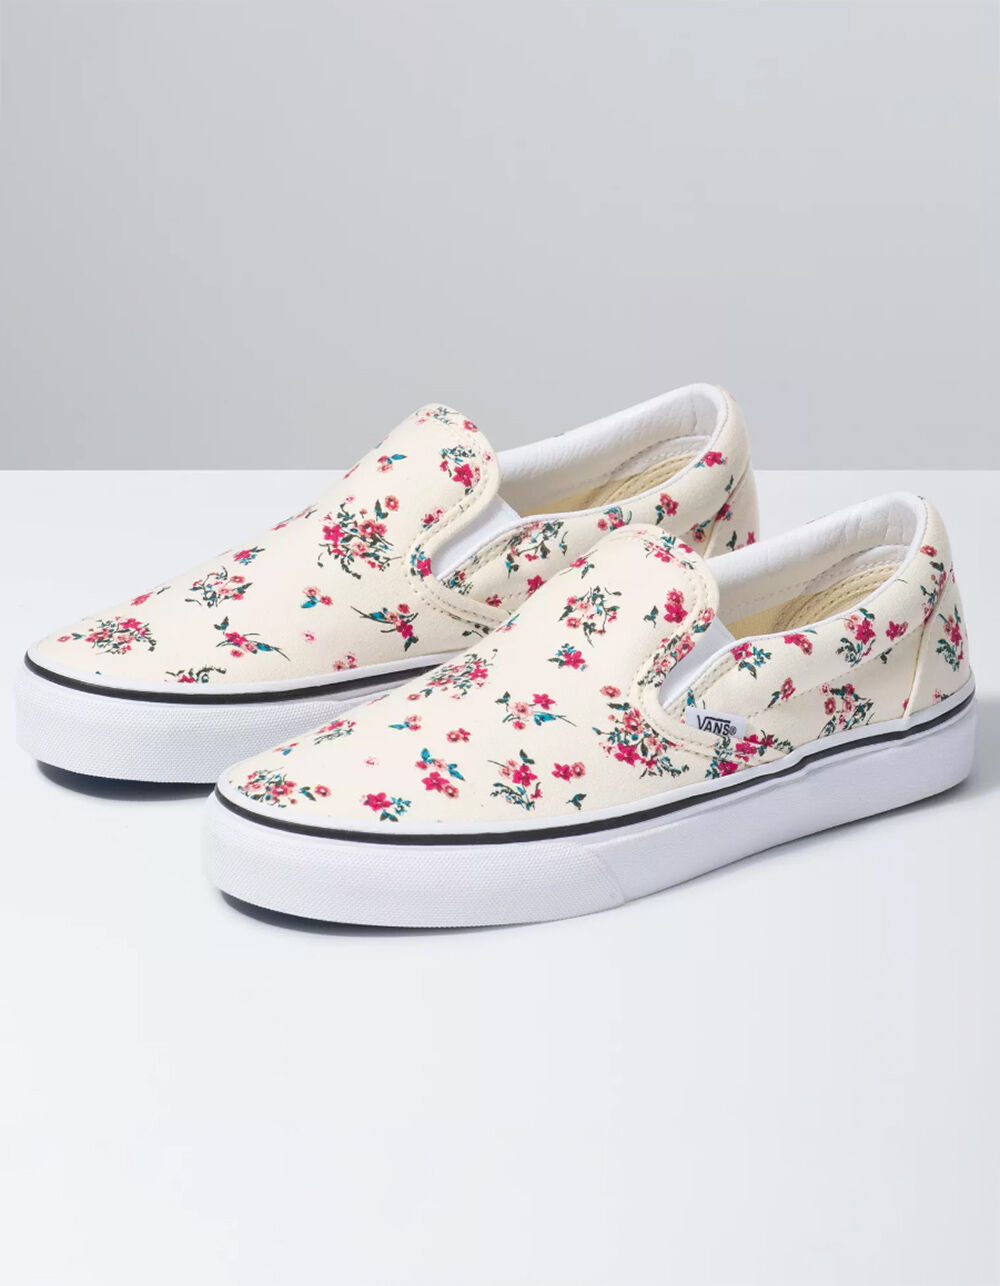 VANS Ditsy Floral Classic Slip-On Womens Shoes - CLASSIC WHITE/TRUE ...